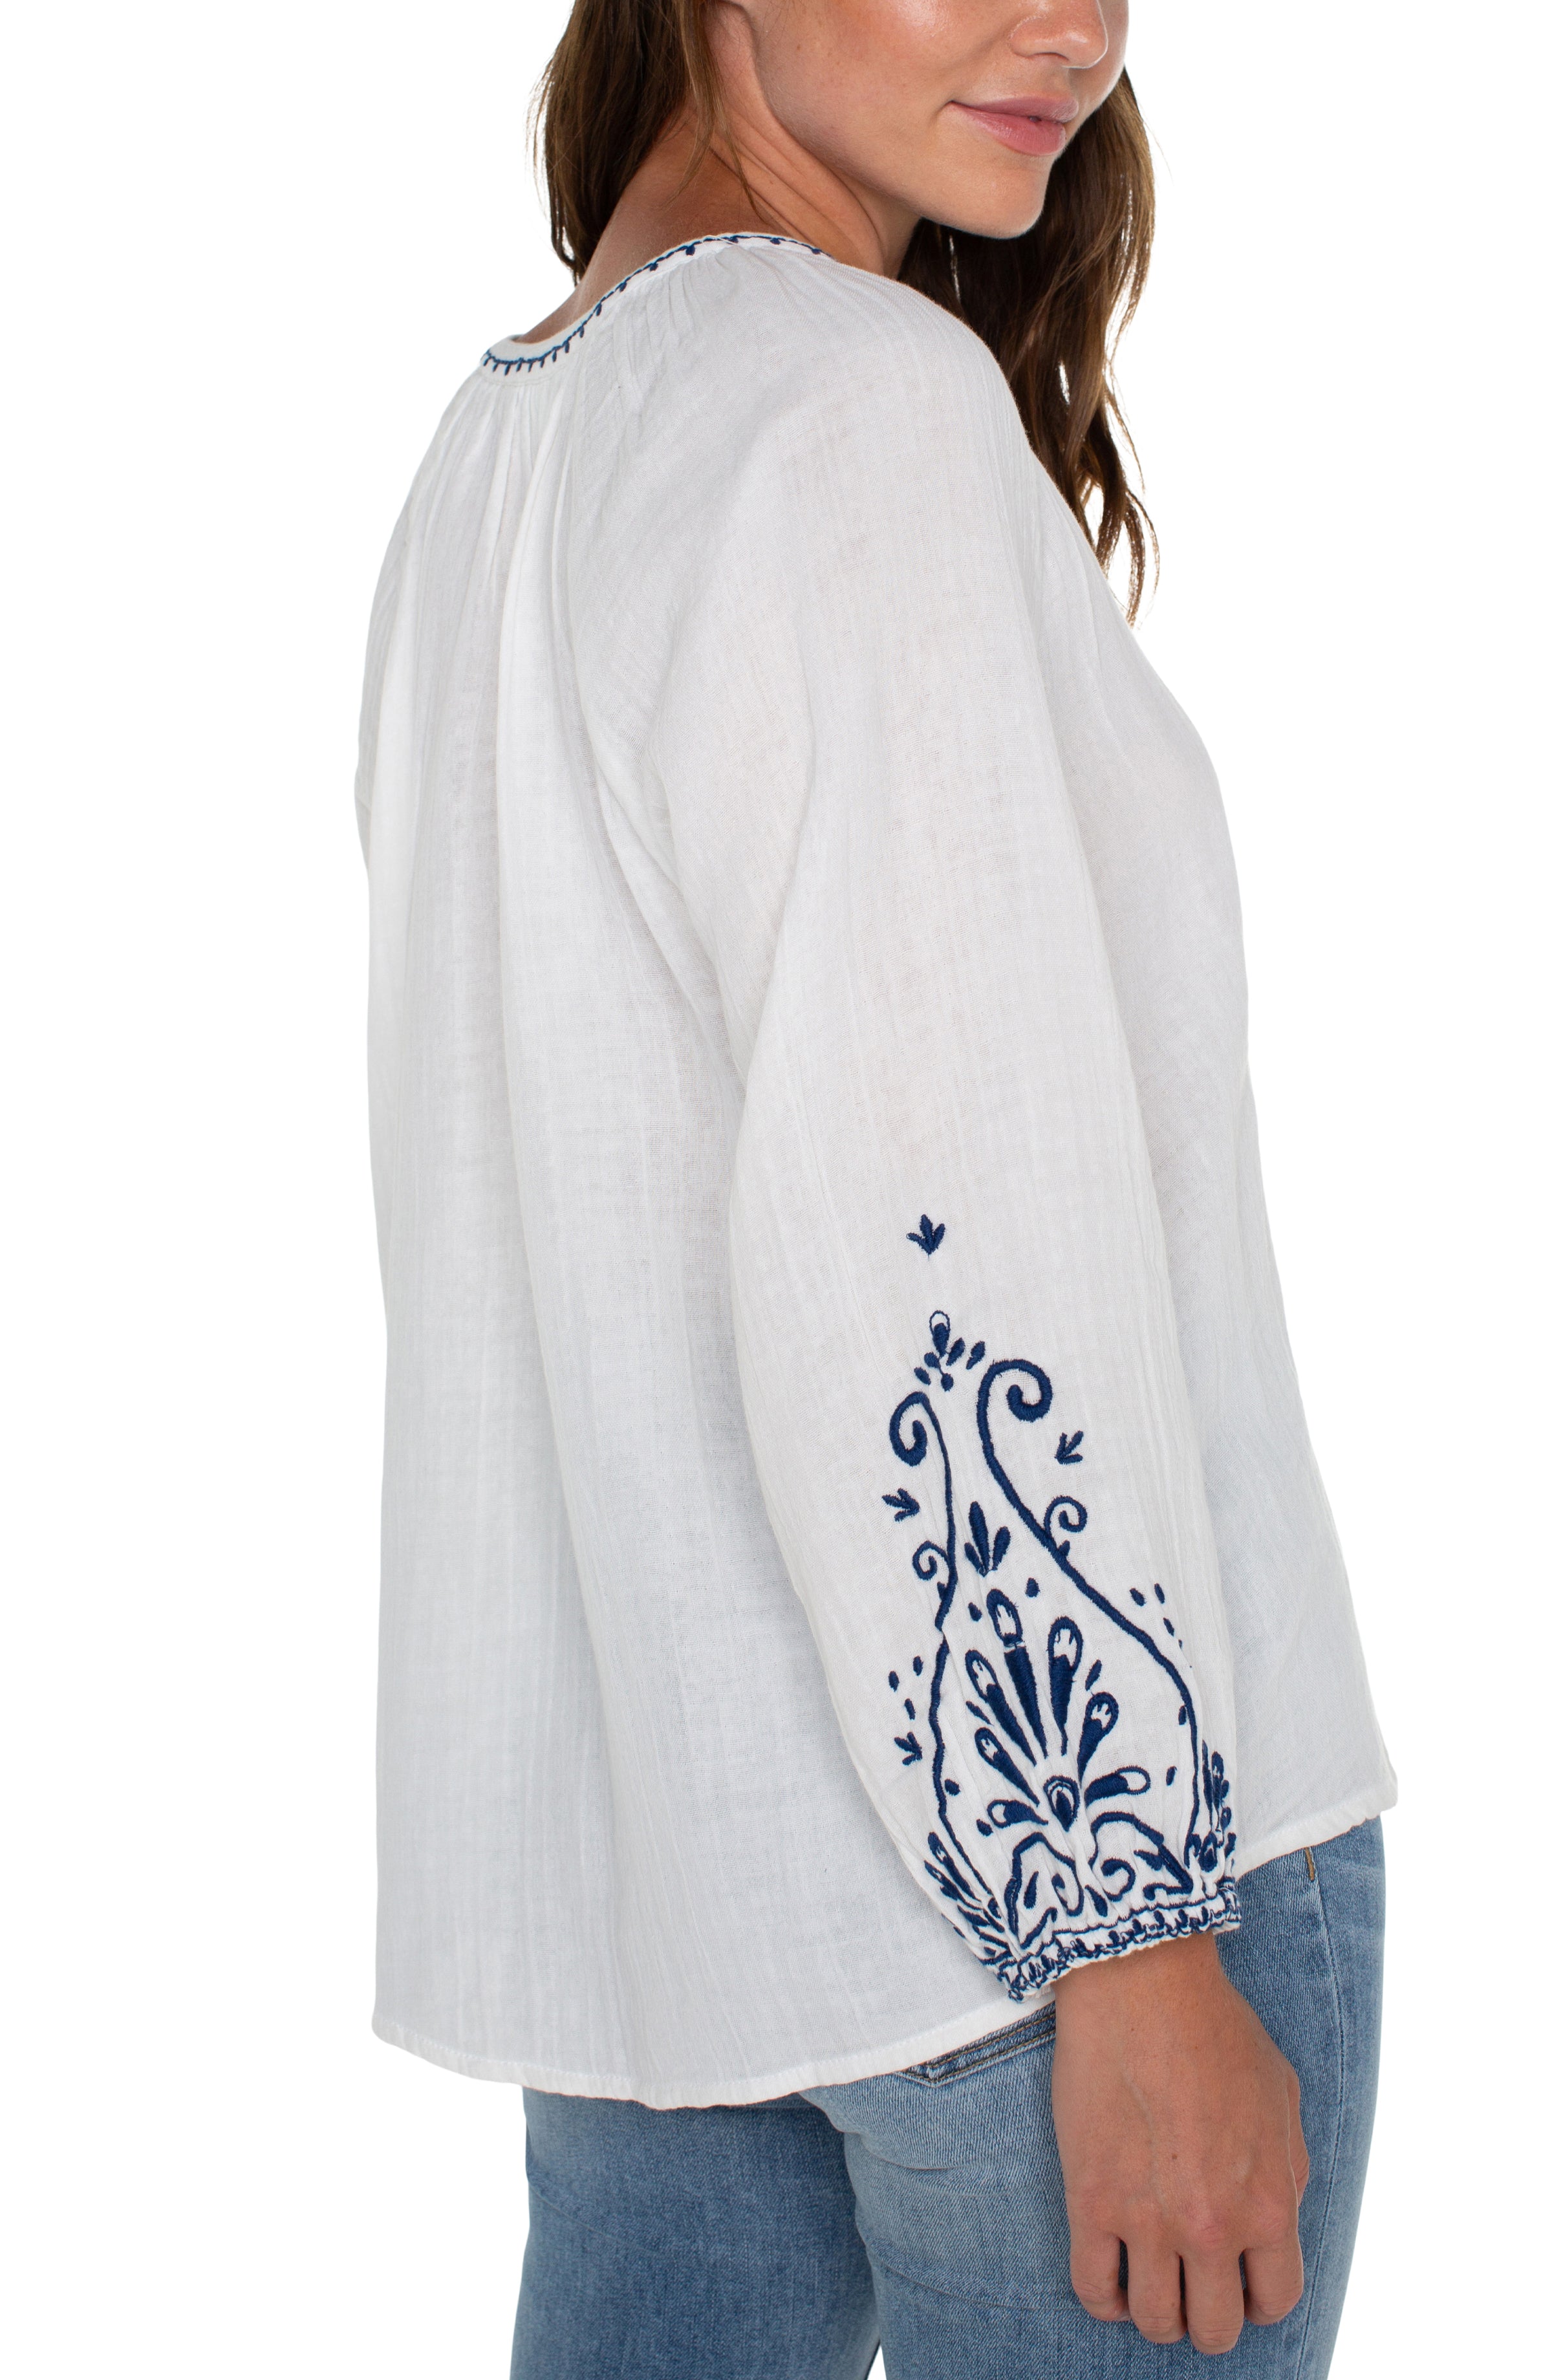 LVP Long Sleeve Embroidered Top - Off White Close Up View